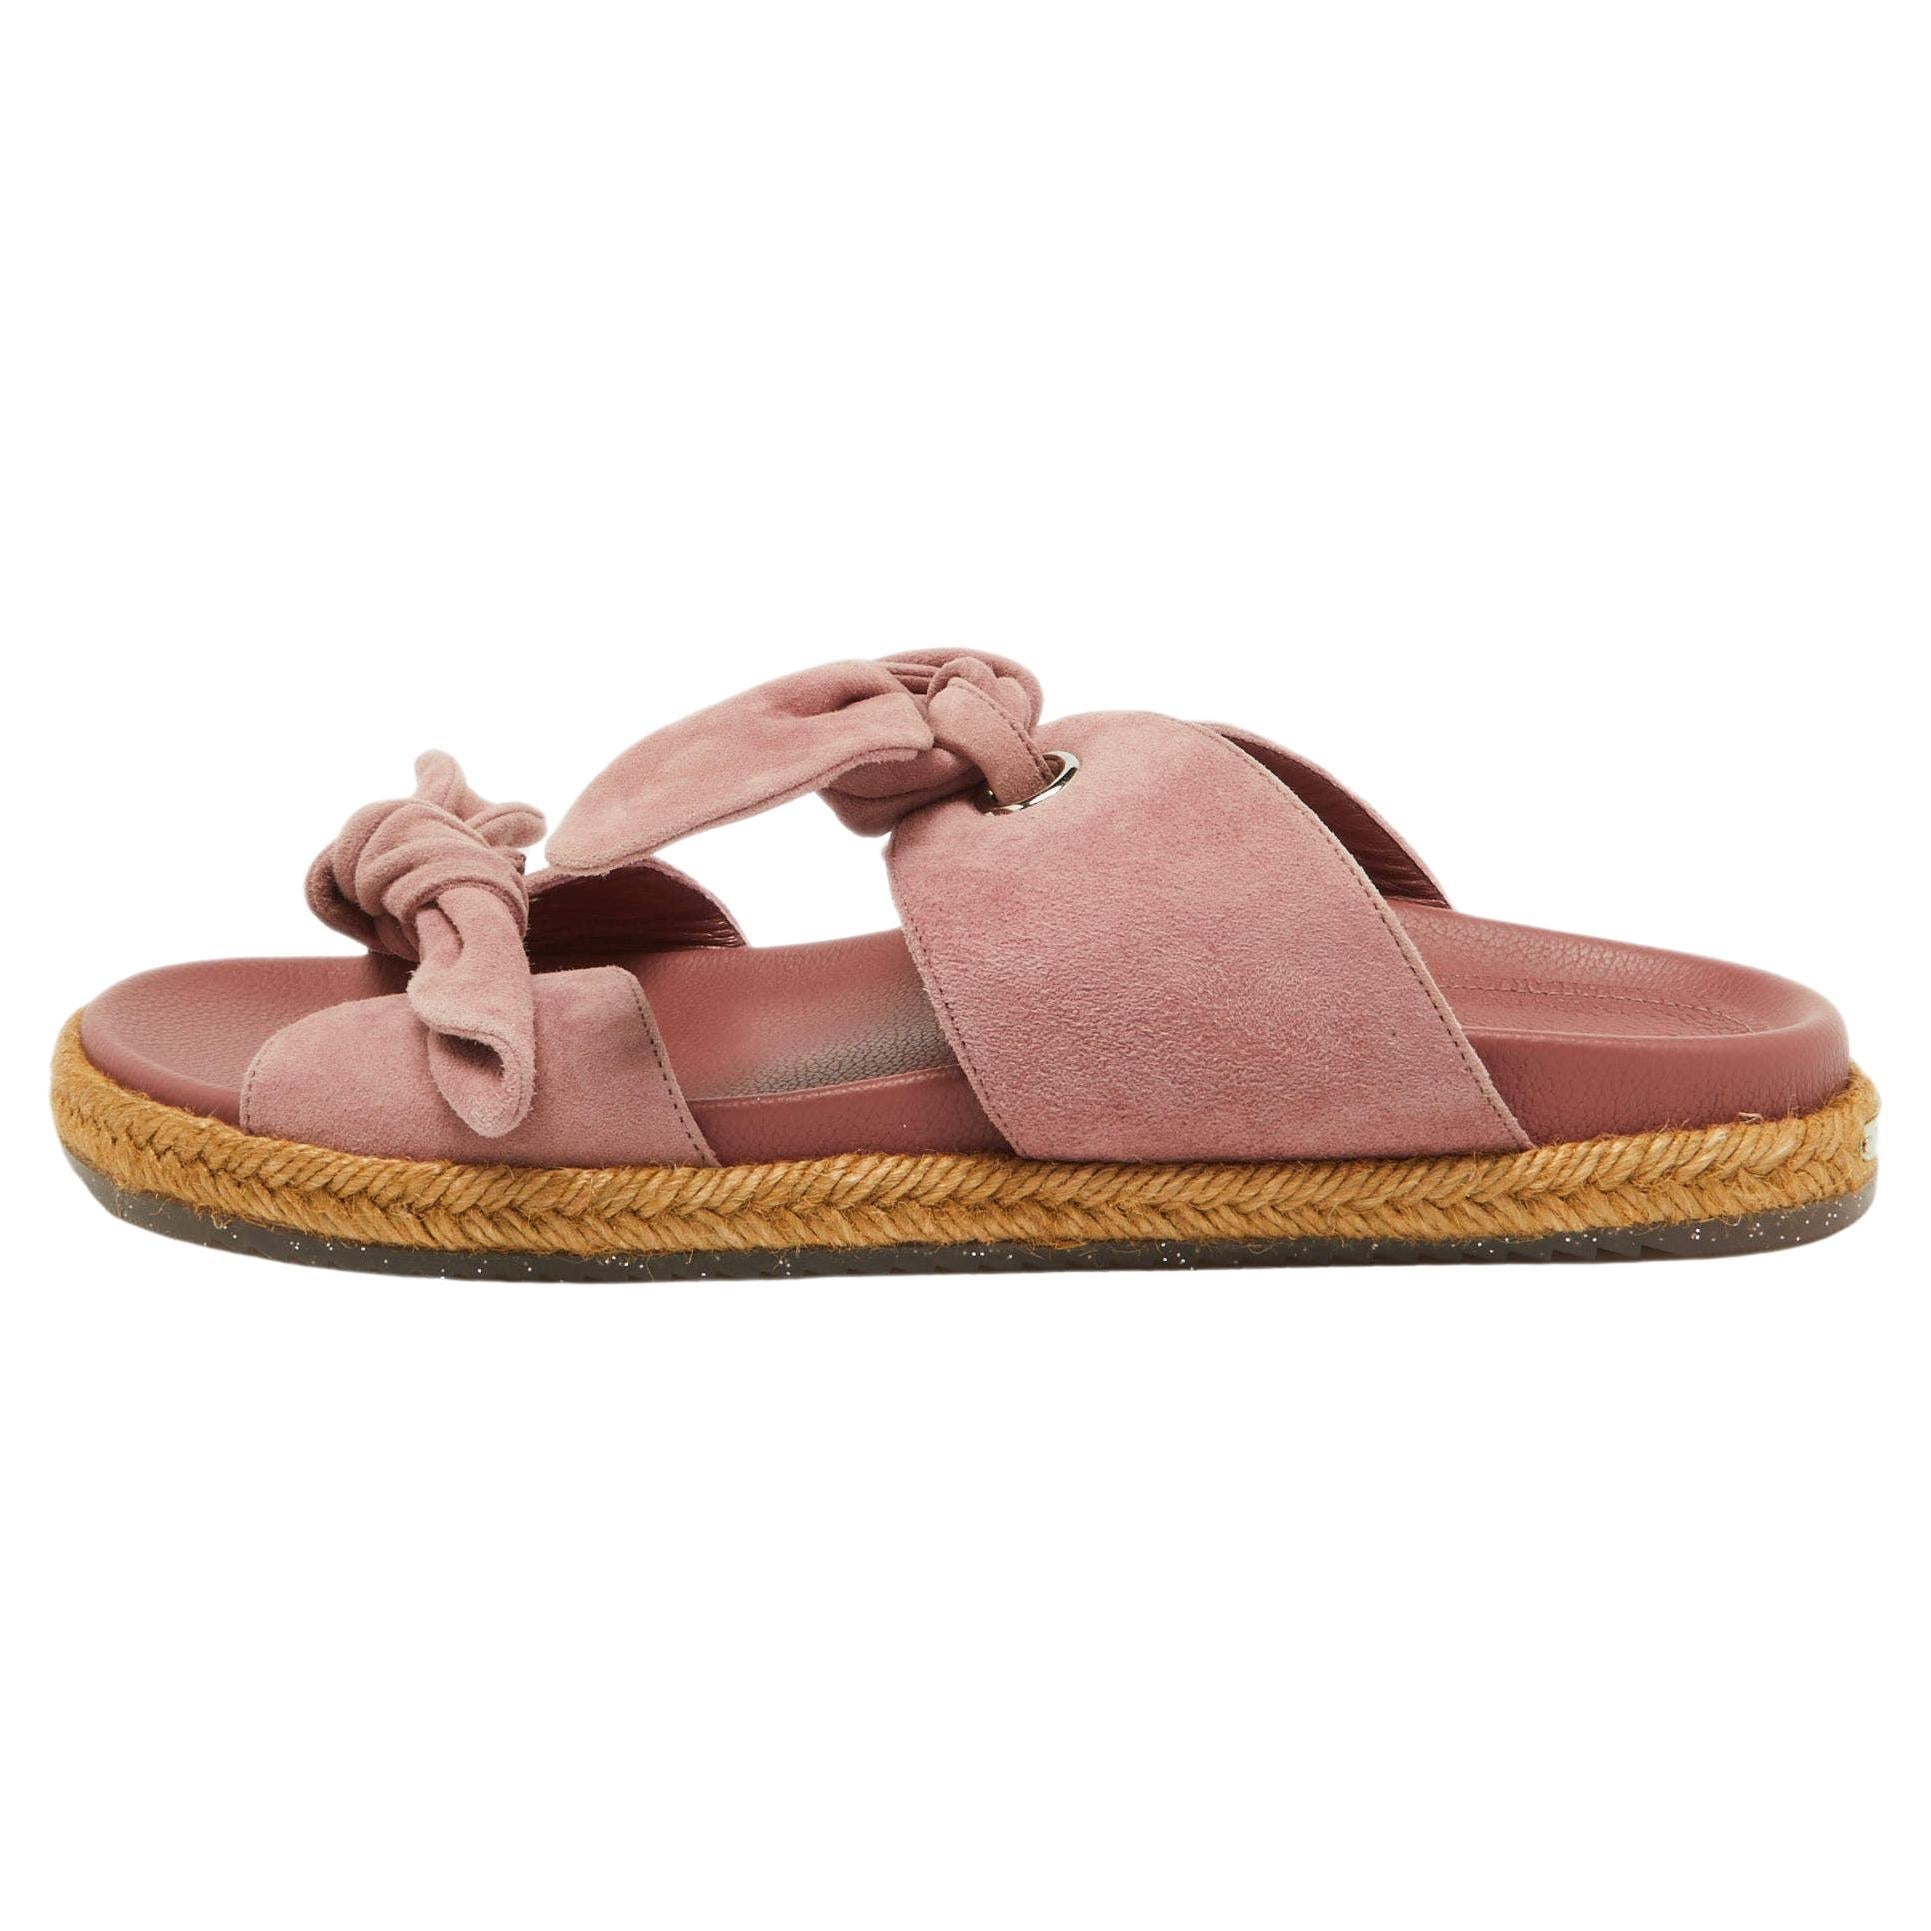 Jimmy Choo Pink Suede Bow Flat Slides Size 38 For Sale